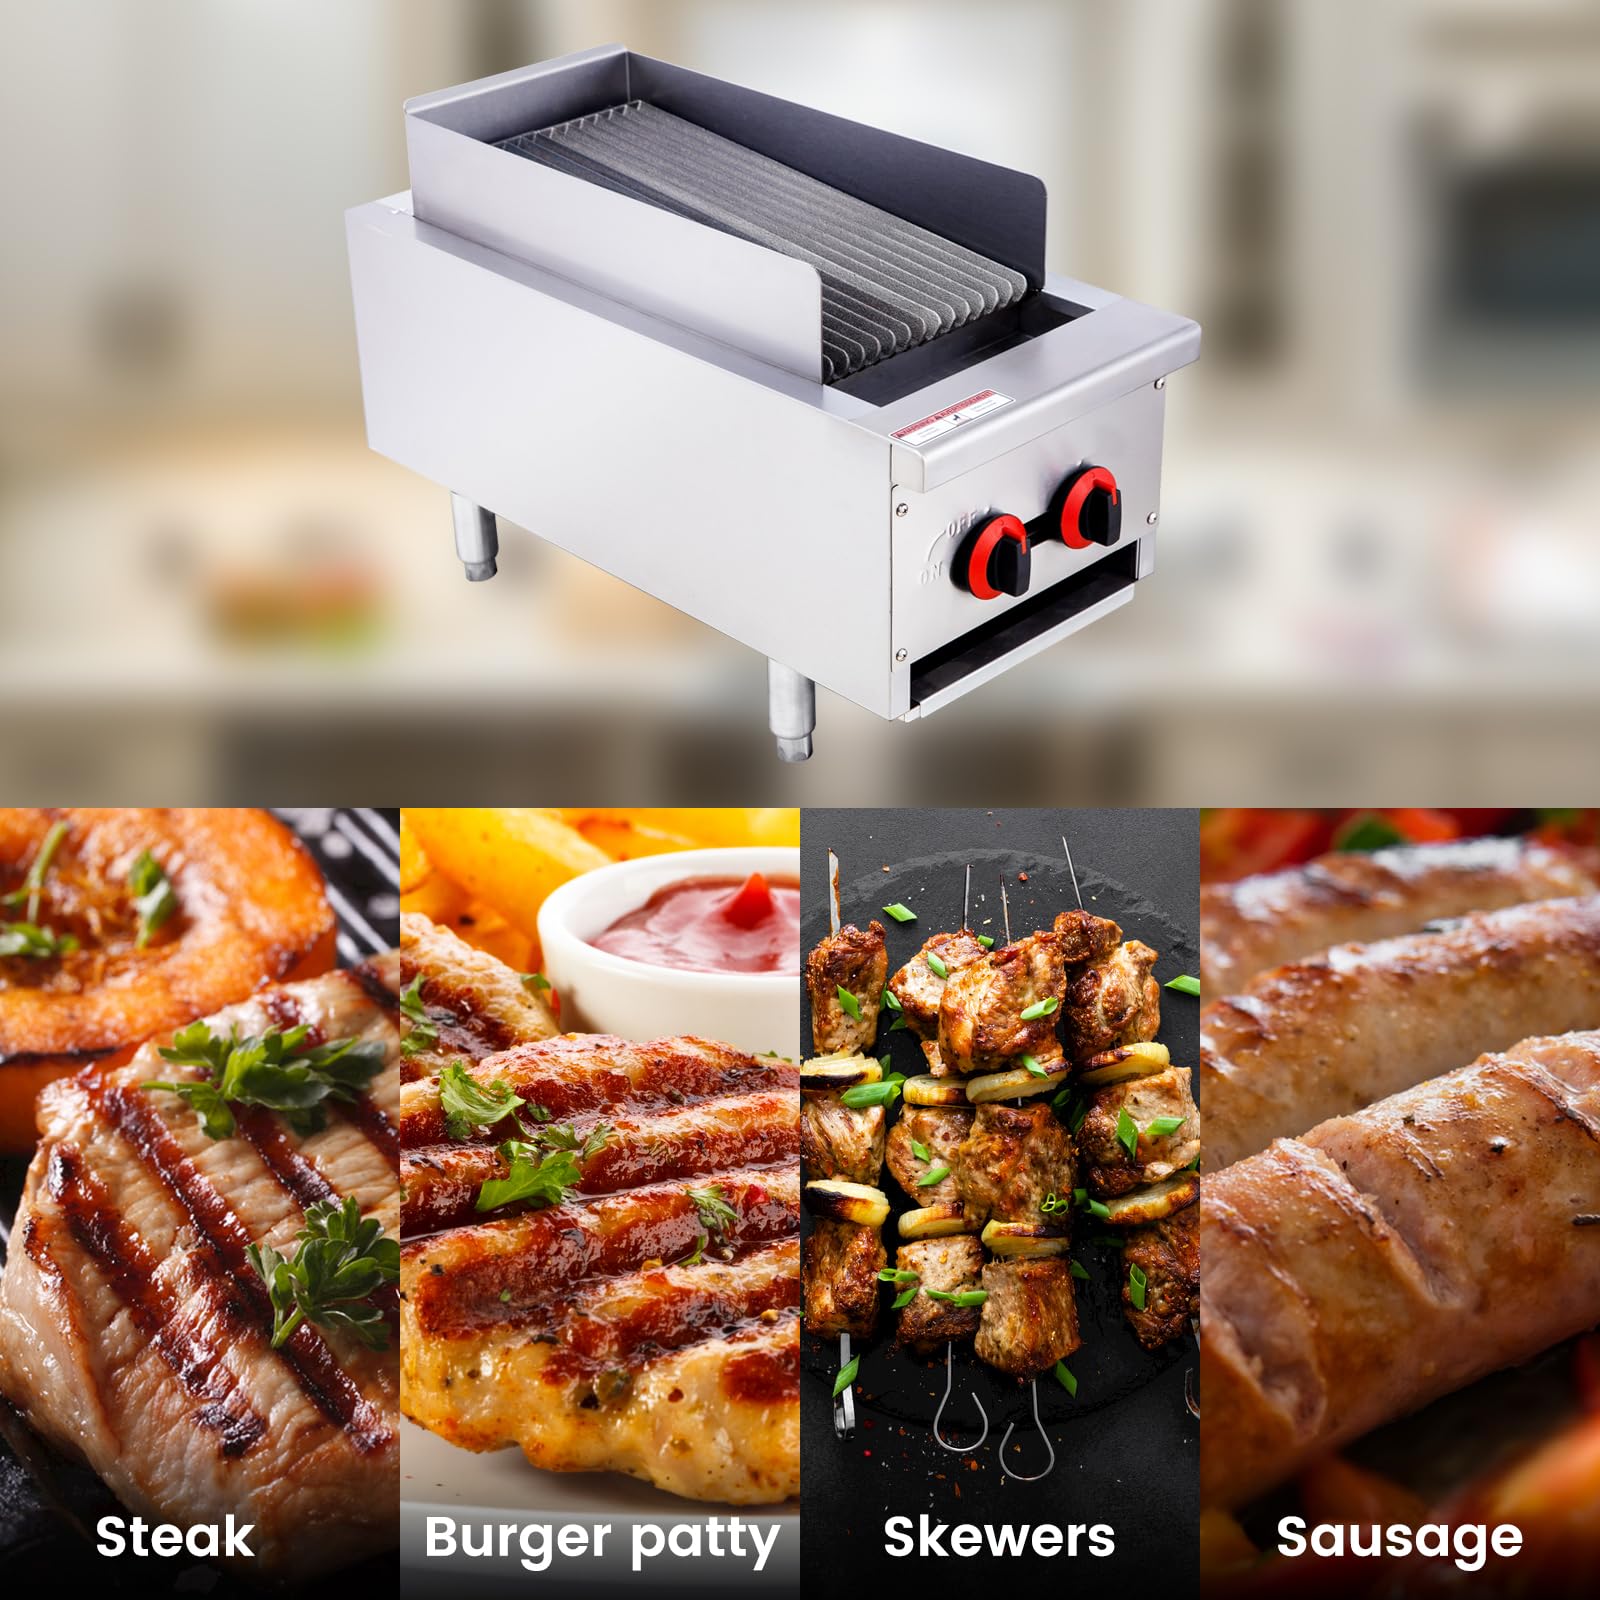 EASYROSE 14" Radiant Gas Charbroiler Commercial Gas Grill Heavy Duty Countertop Broiler Grill with 2 Burners BTU 40,000, ETL Certified